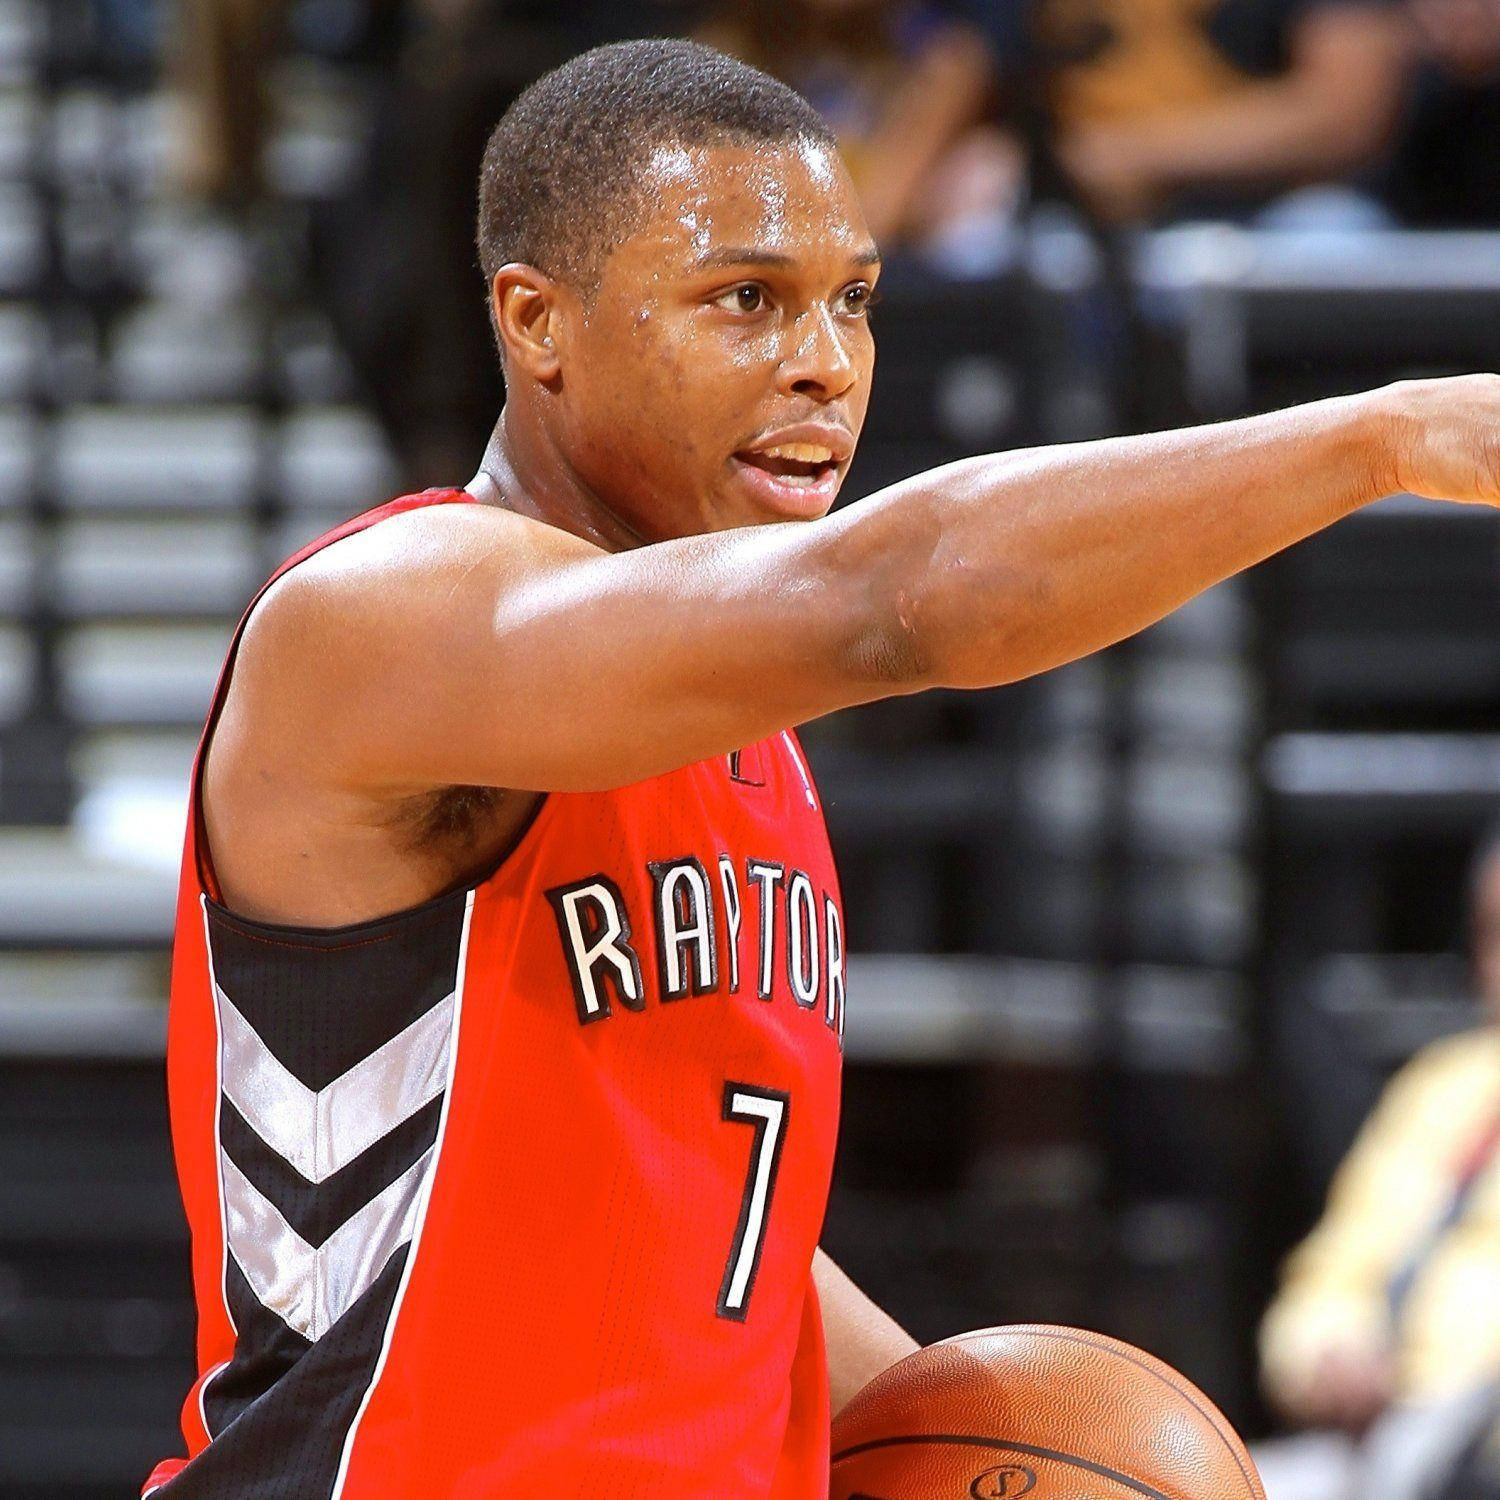 Kylelowry Point Guard (kyle Lowry Point Guard) Wallpaper